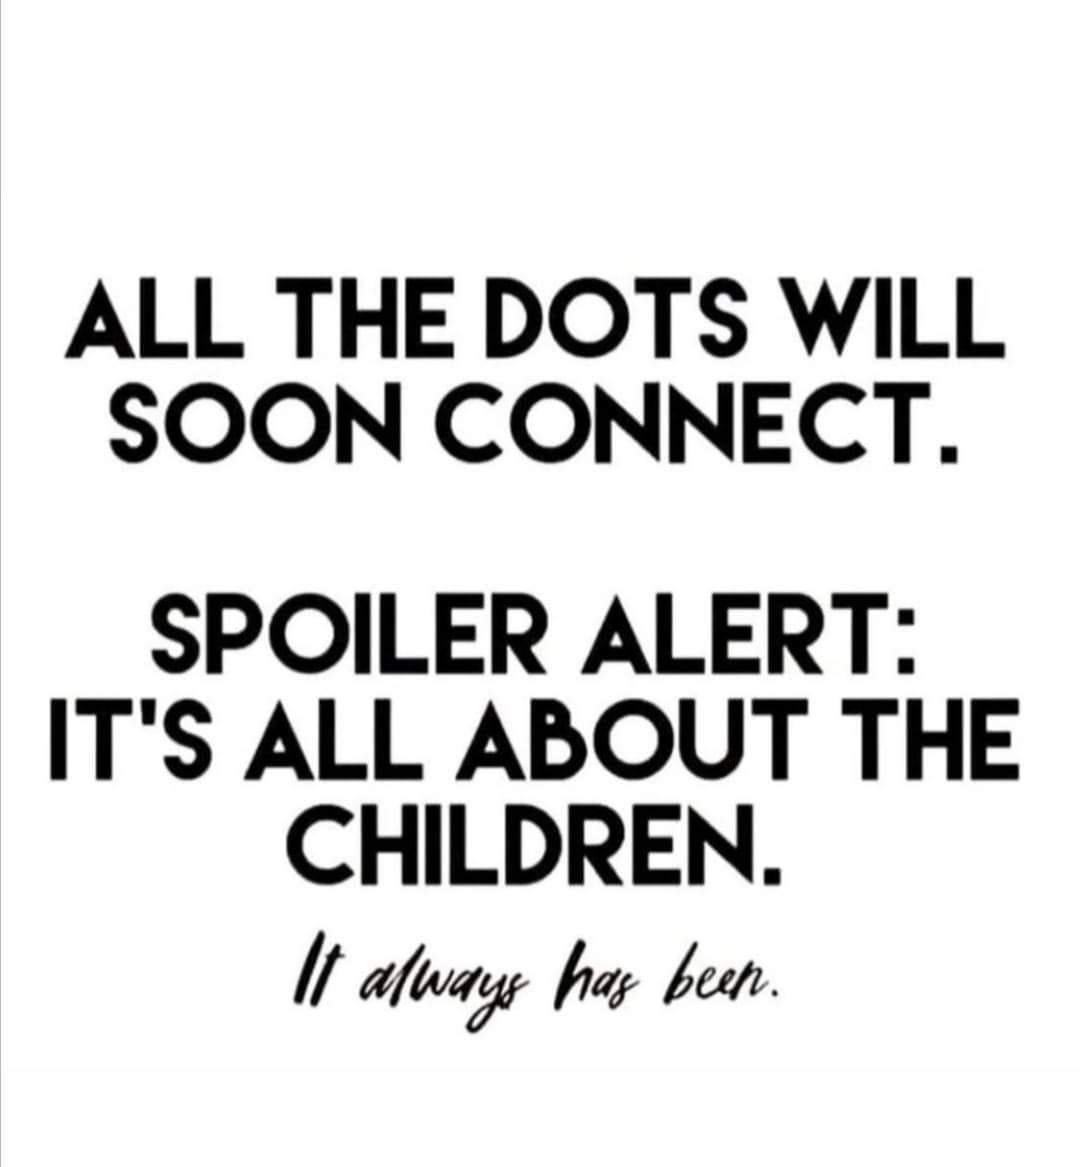 May be an image of text that says "ALL THE DOTS WILL SOON CONNECT. SPOILER ALERT: IT'S ALL ABOUT THE CHILDREN. It always has been."